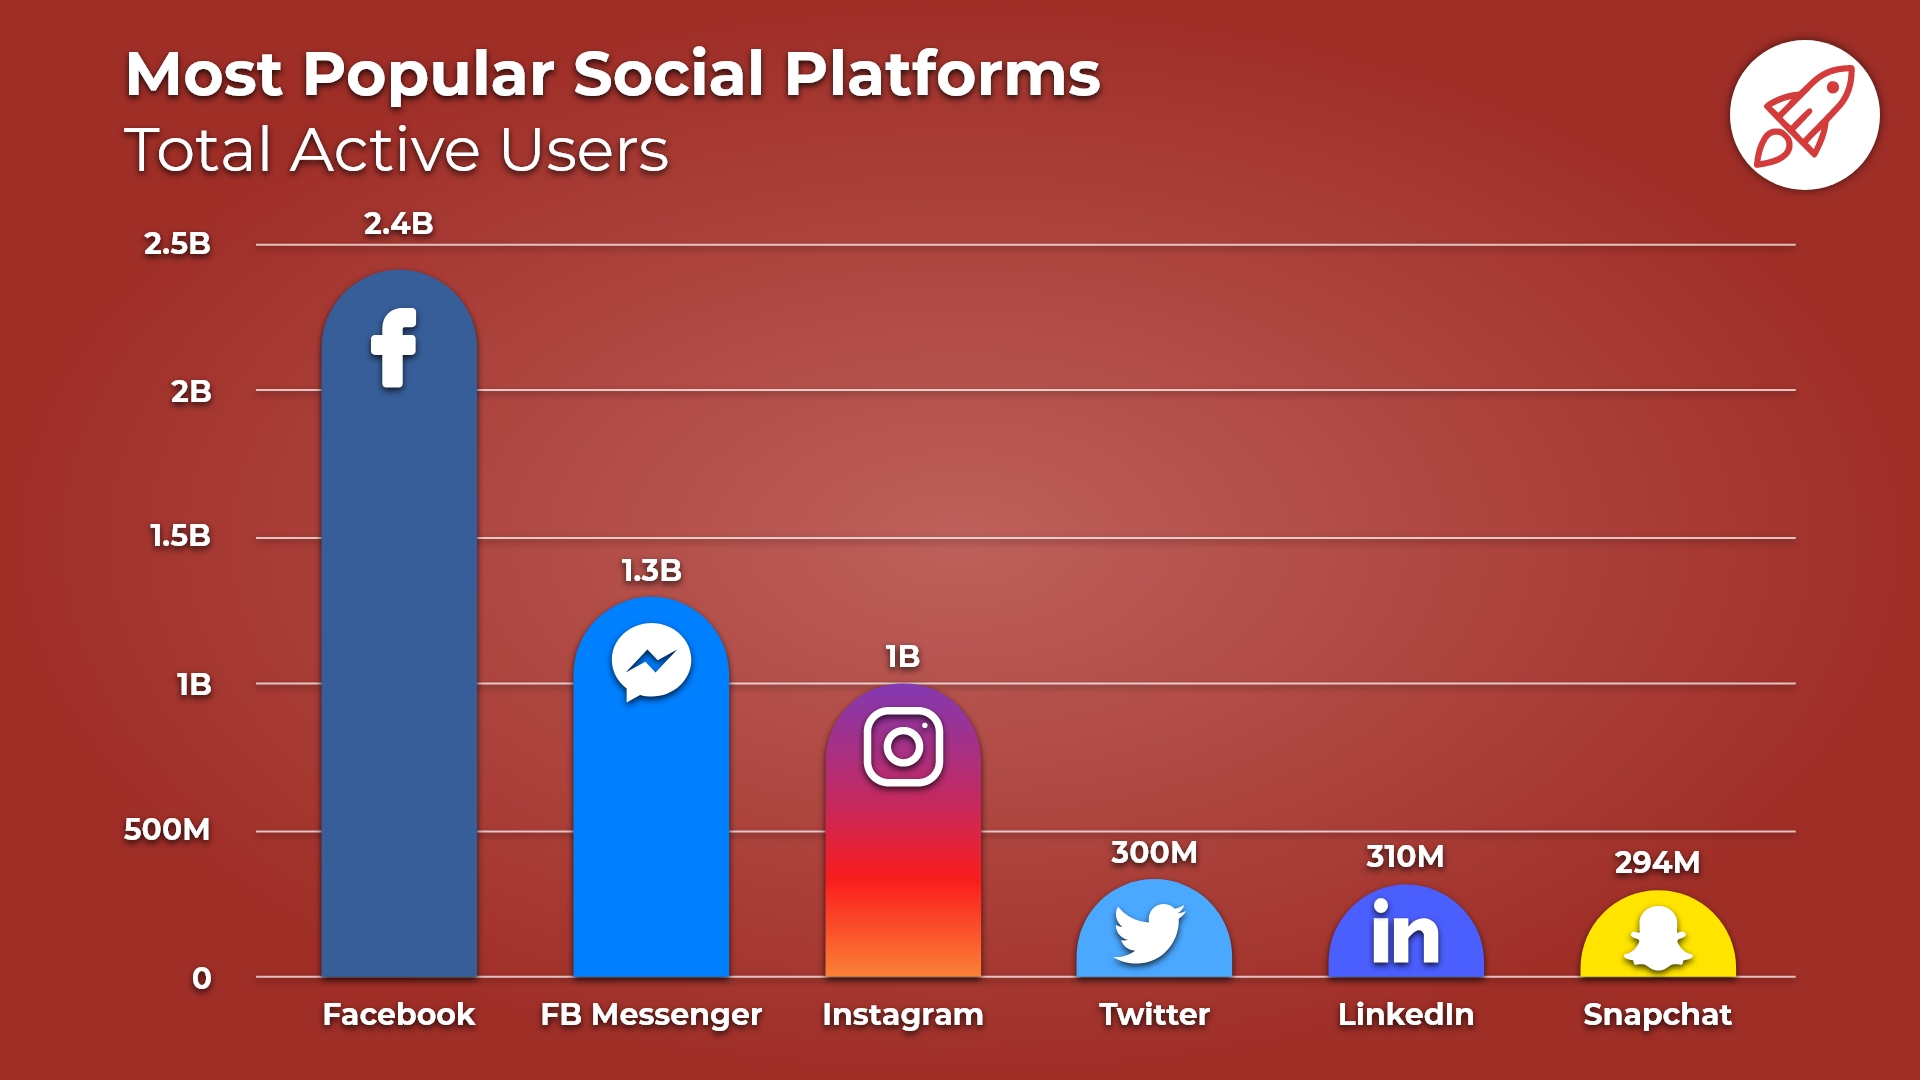 User россия. Most popular social Media. Users on social Media platforms. Most popular social Networks by number of Active users эссе. The most popular social Network in the World.